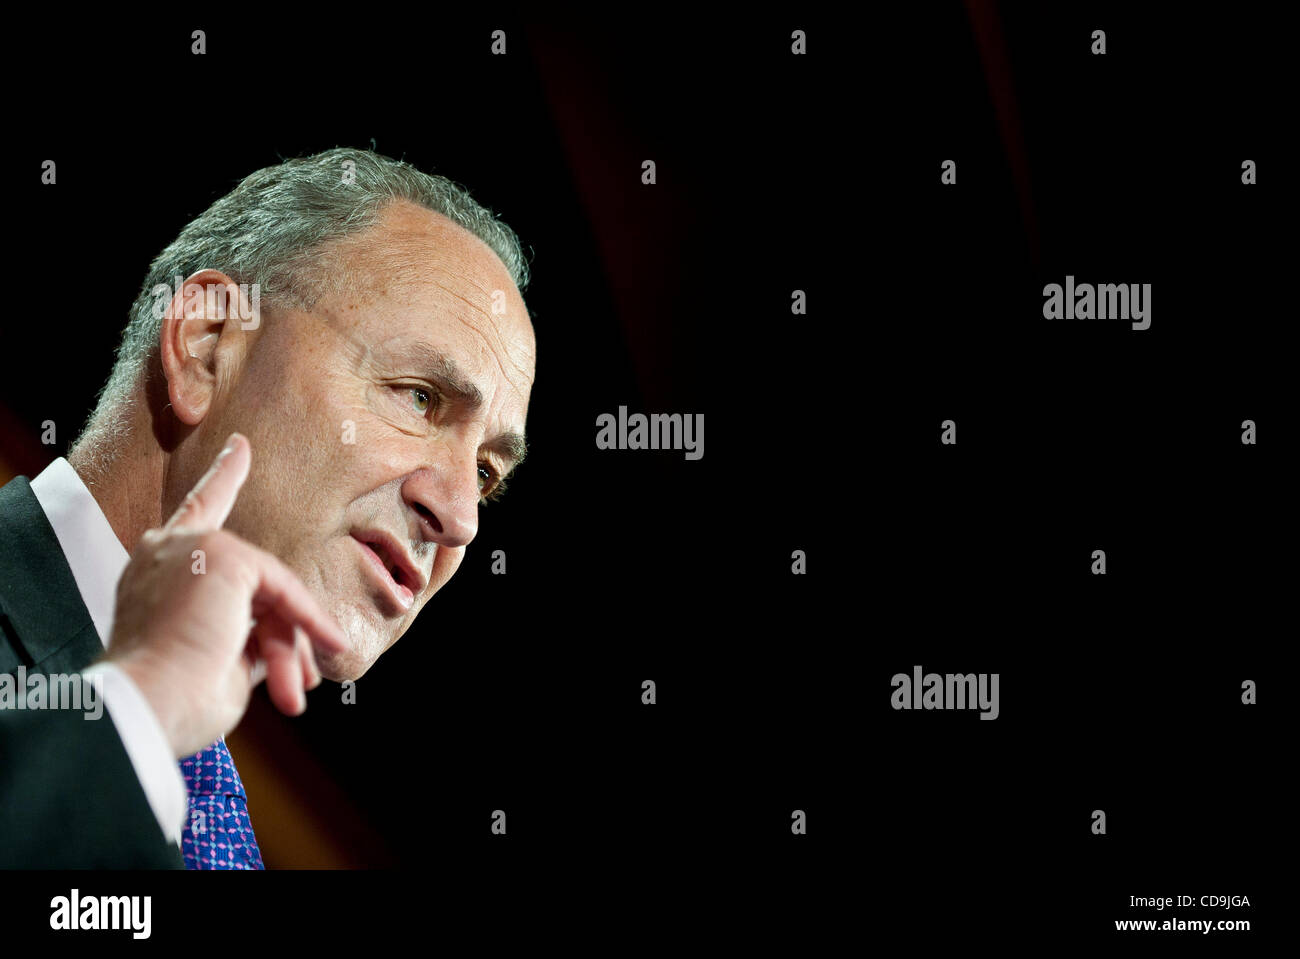 Jul 14, 2010 - Washington, District of Columbia, U.S., -  Senator Charles Schumer speaks to the press urging the British government to investigate whether BP a hand in securing the release of Lockerbie bomber al-Megrahi in order to help close a 00-million offshore oil drilling deal with Libya. (Cred Stock Photo